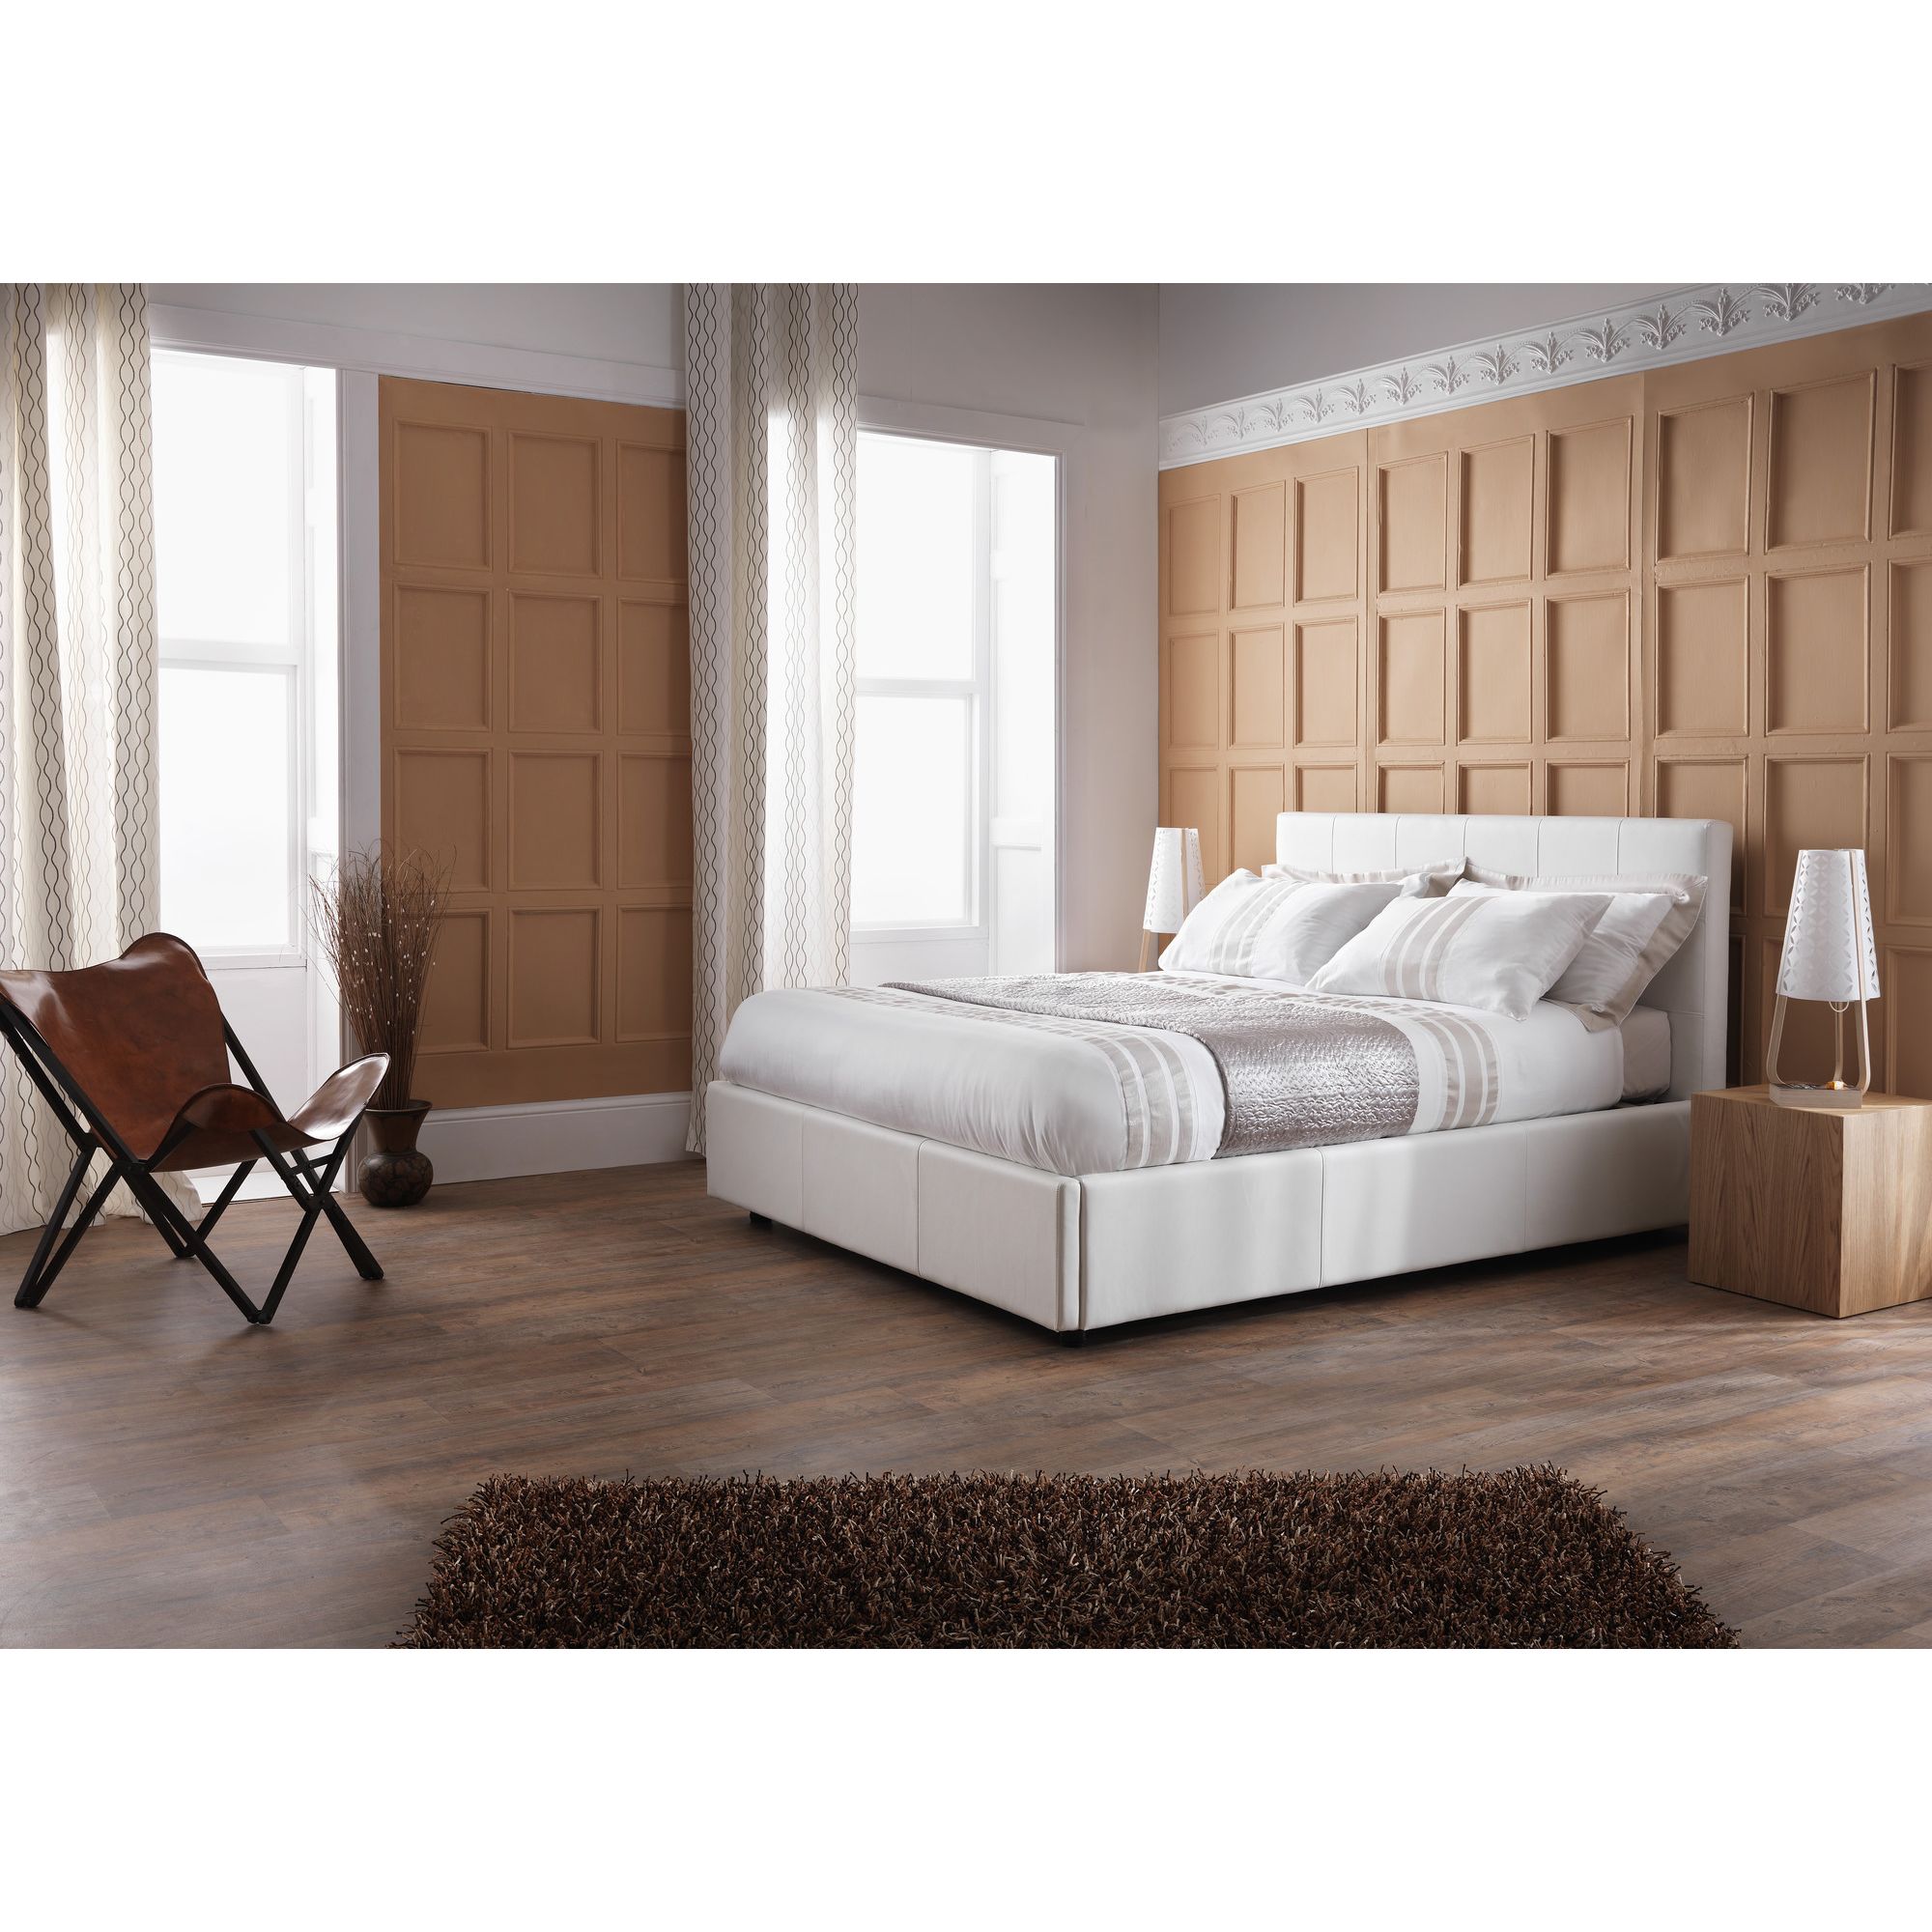 Serene Furnishings Lucca Ottoman Bed - Stone - Small Double at Tesco Direct